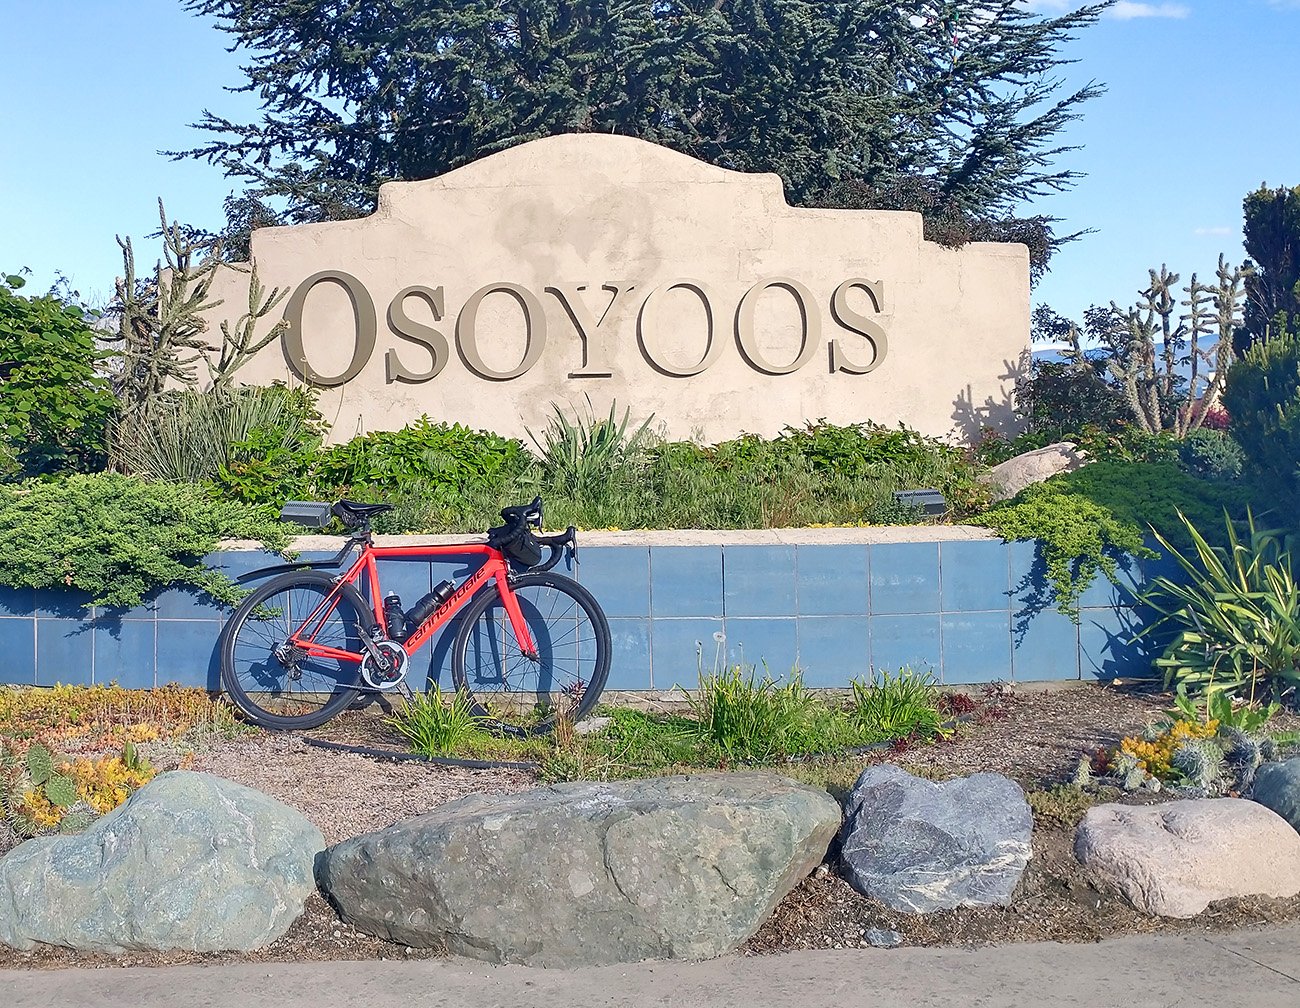 Osoyoos, where Anarchist Pass begins. Really beautiful little town.